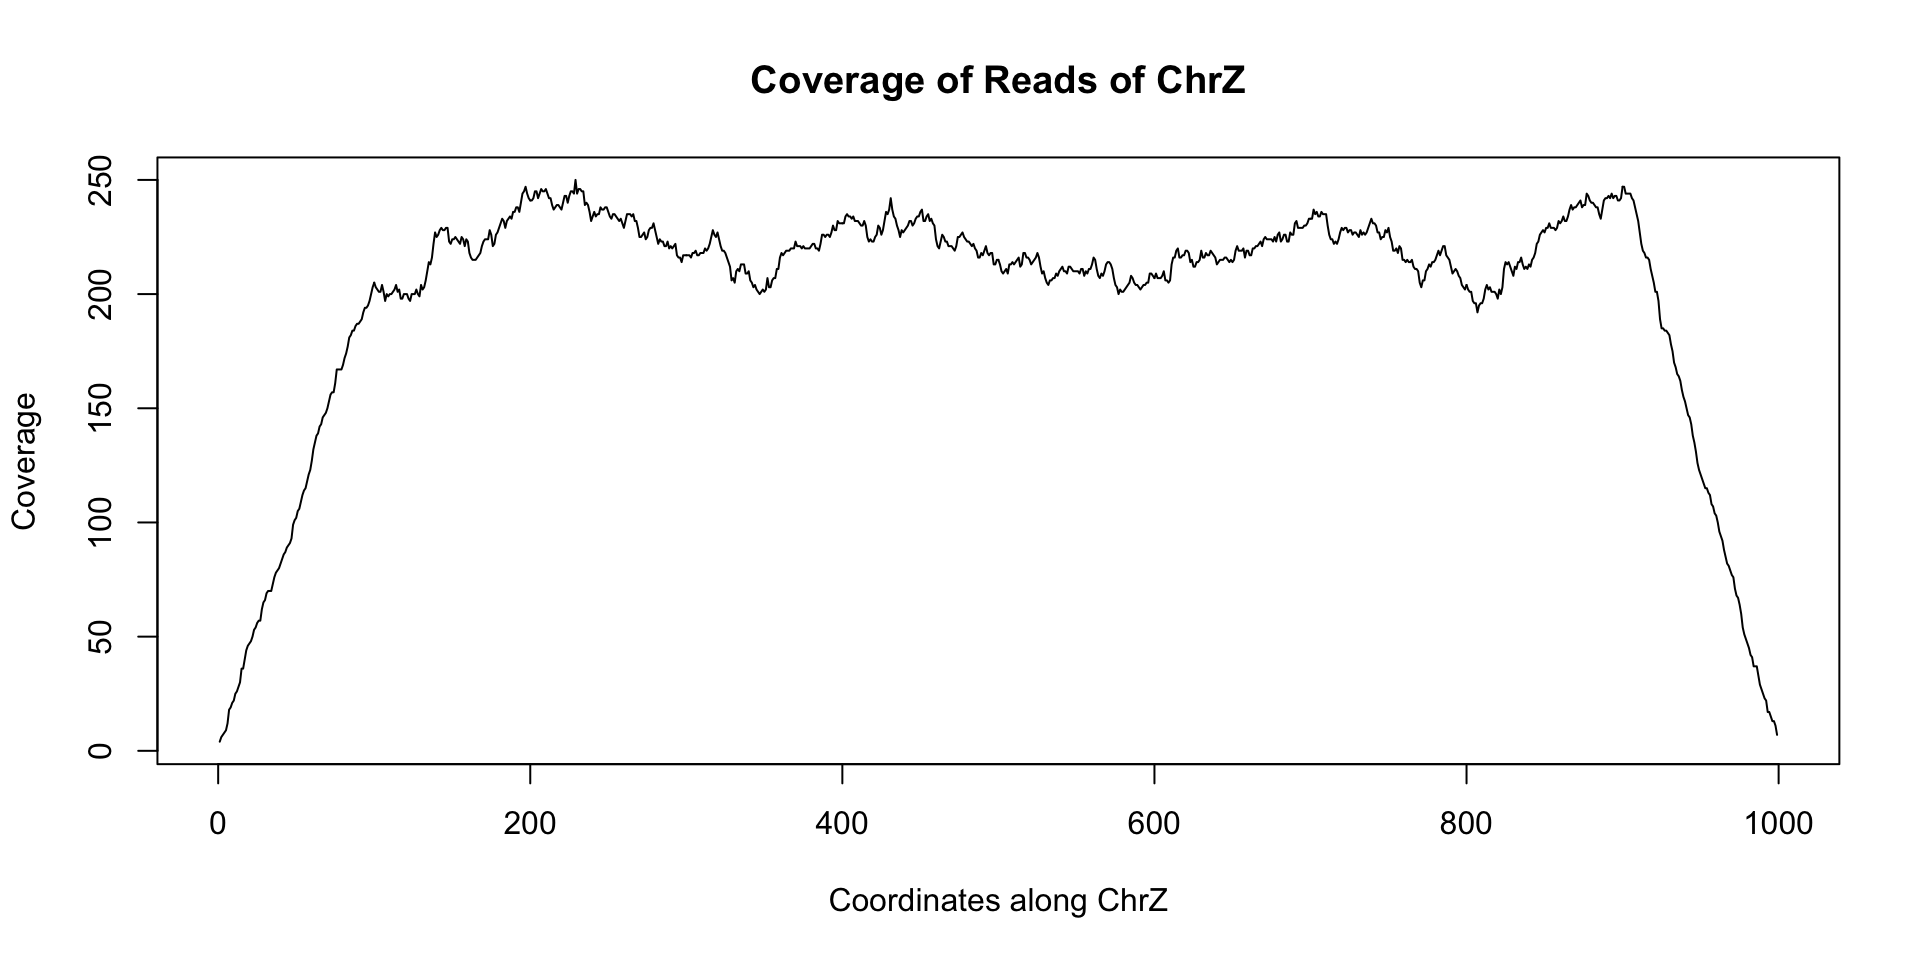 Coverage of Reads ChrZ